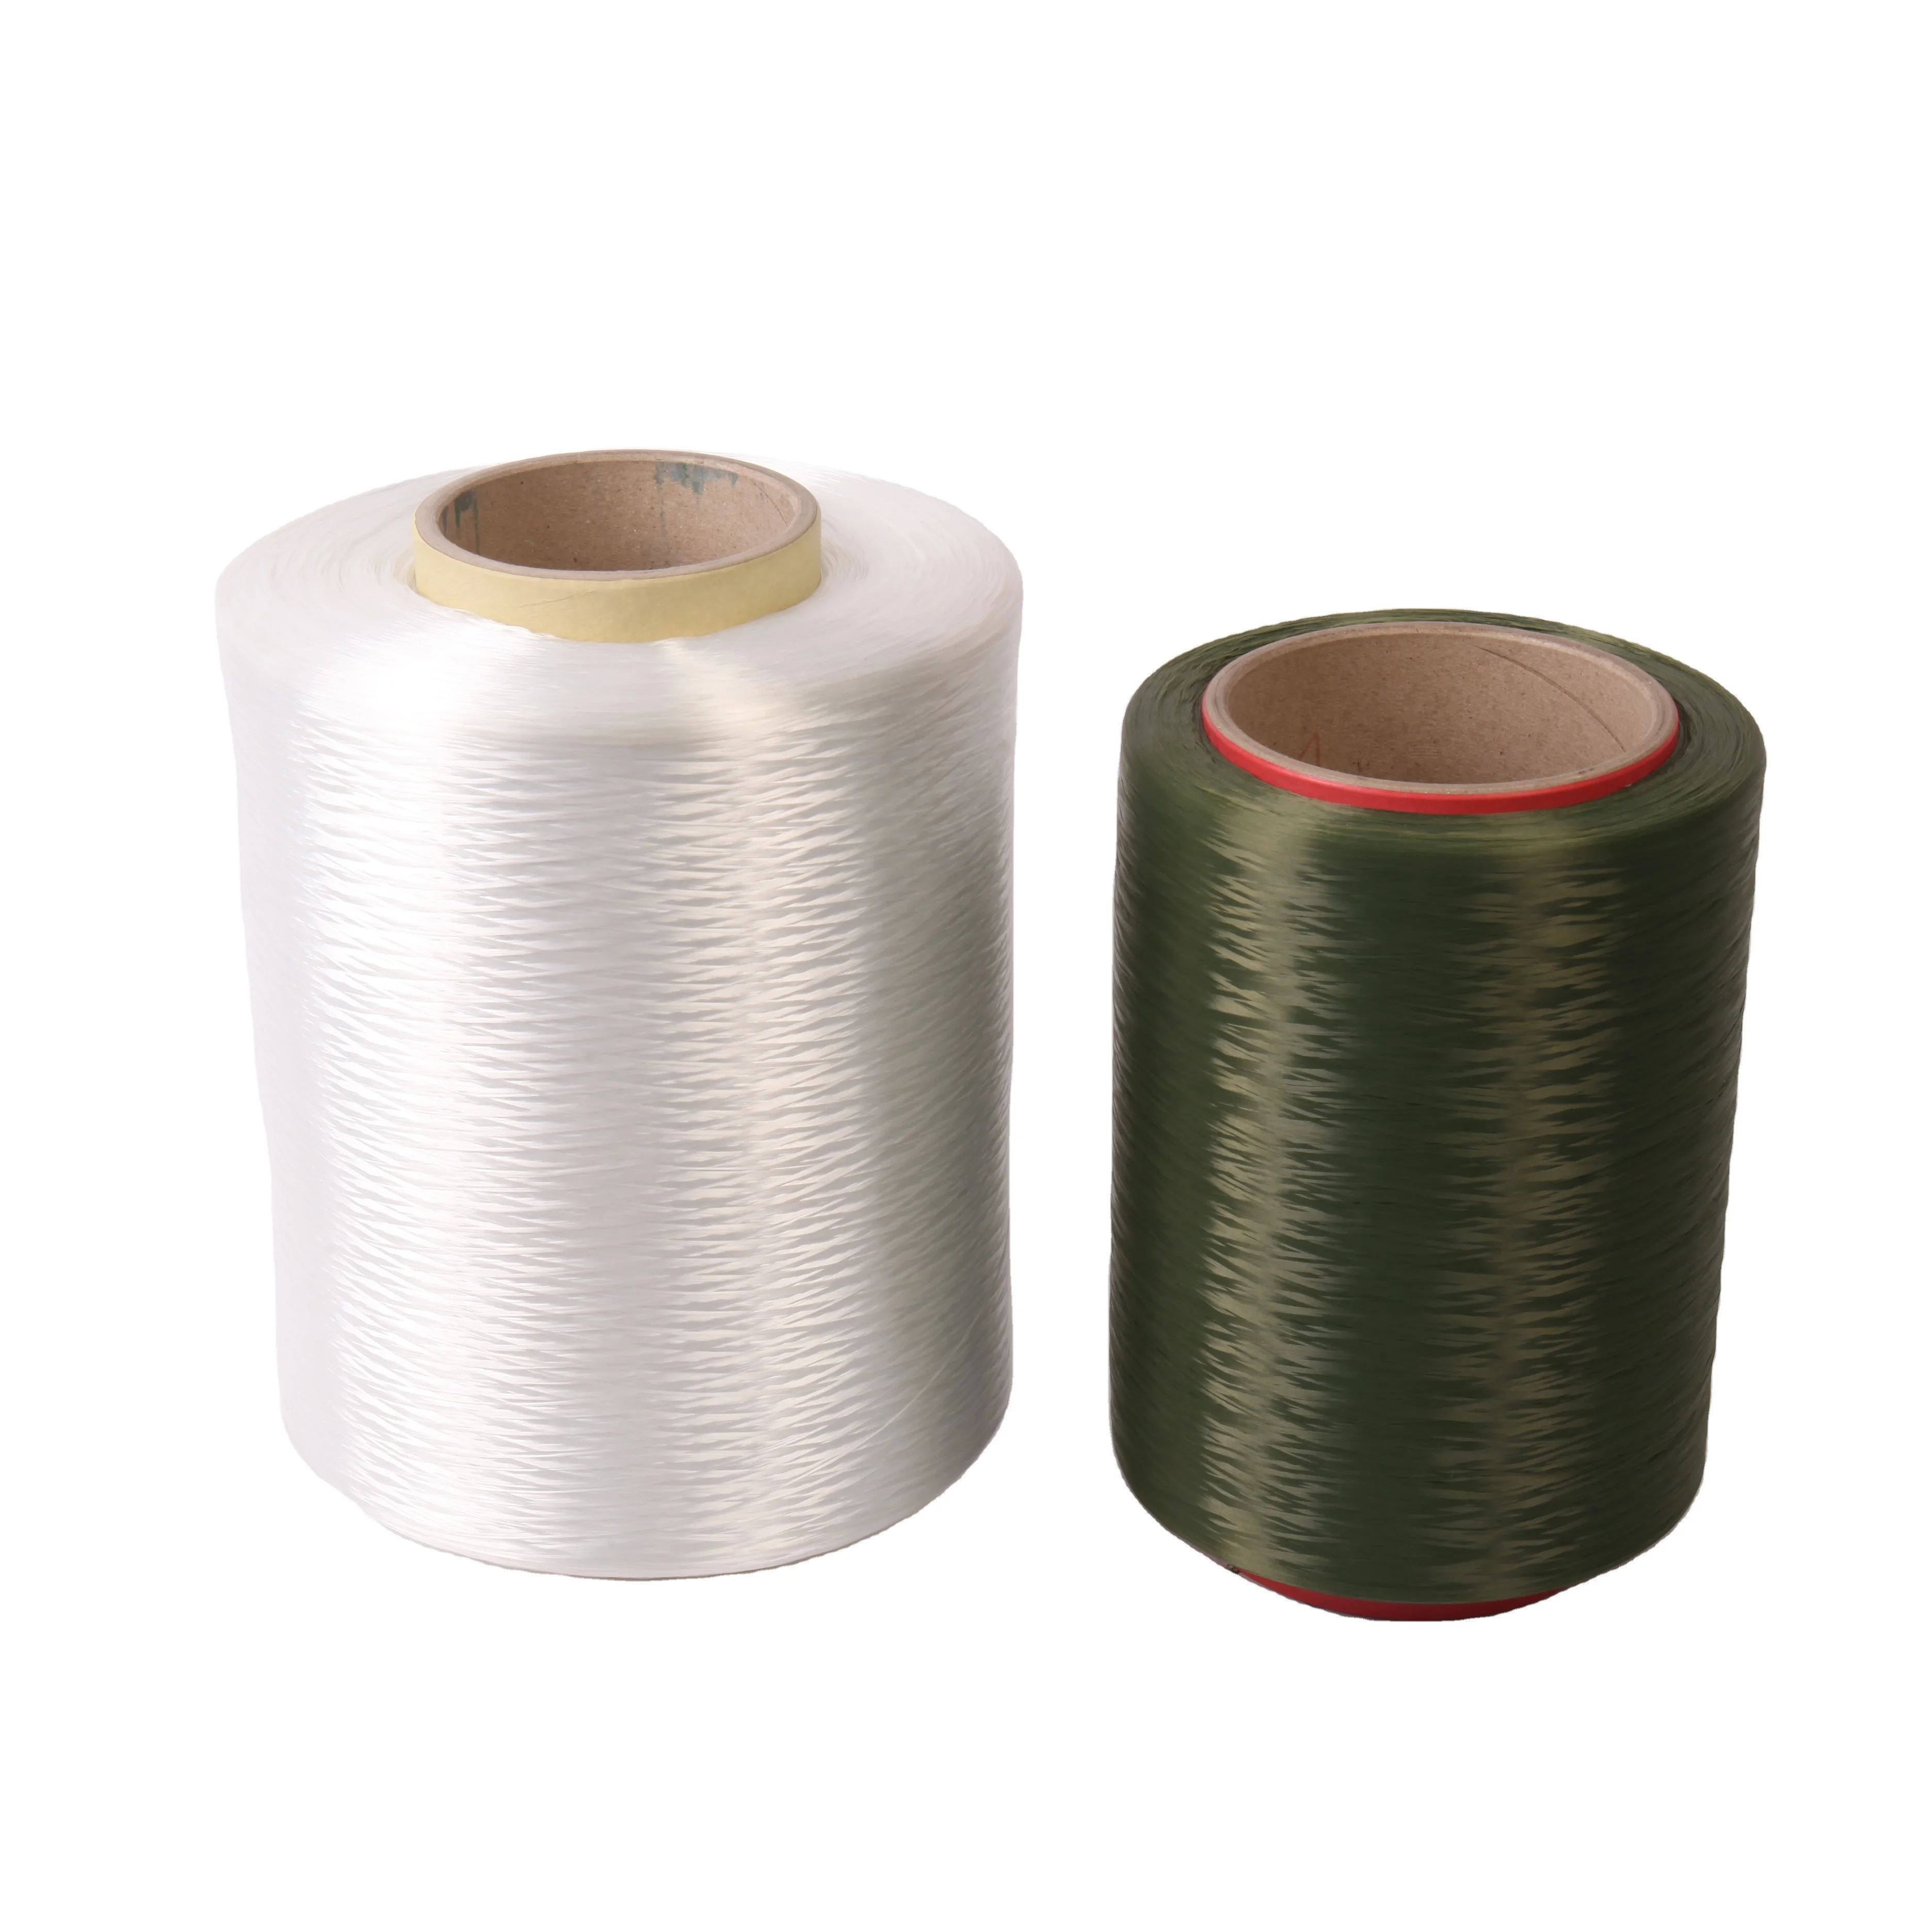 
recycled polyester filament multifilamento fdy yarns 1100 dtex 2200dtex 3300dtex for buy fishing net 